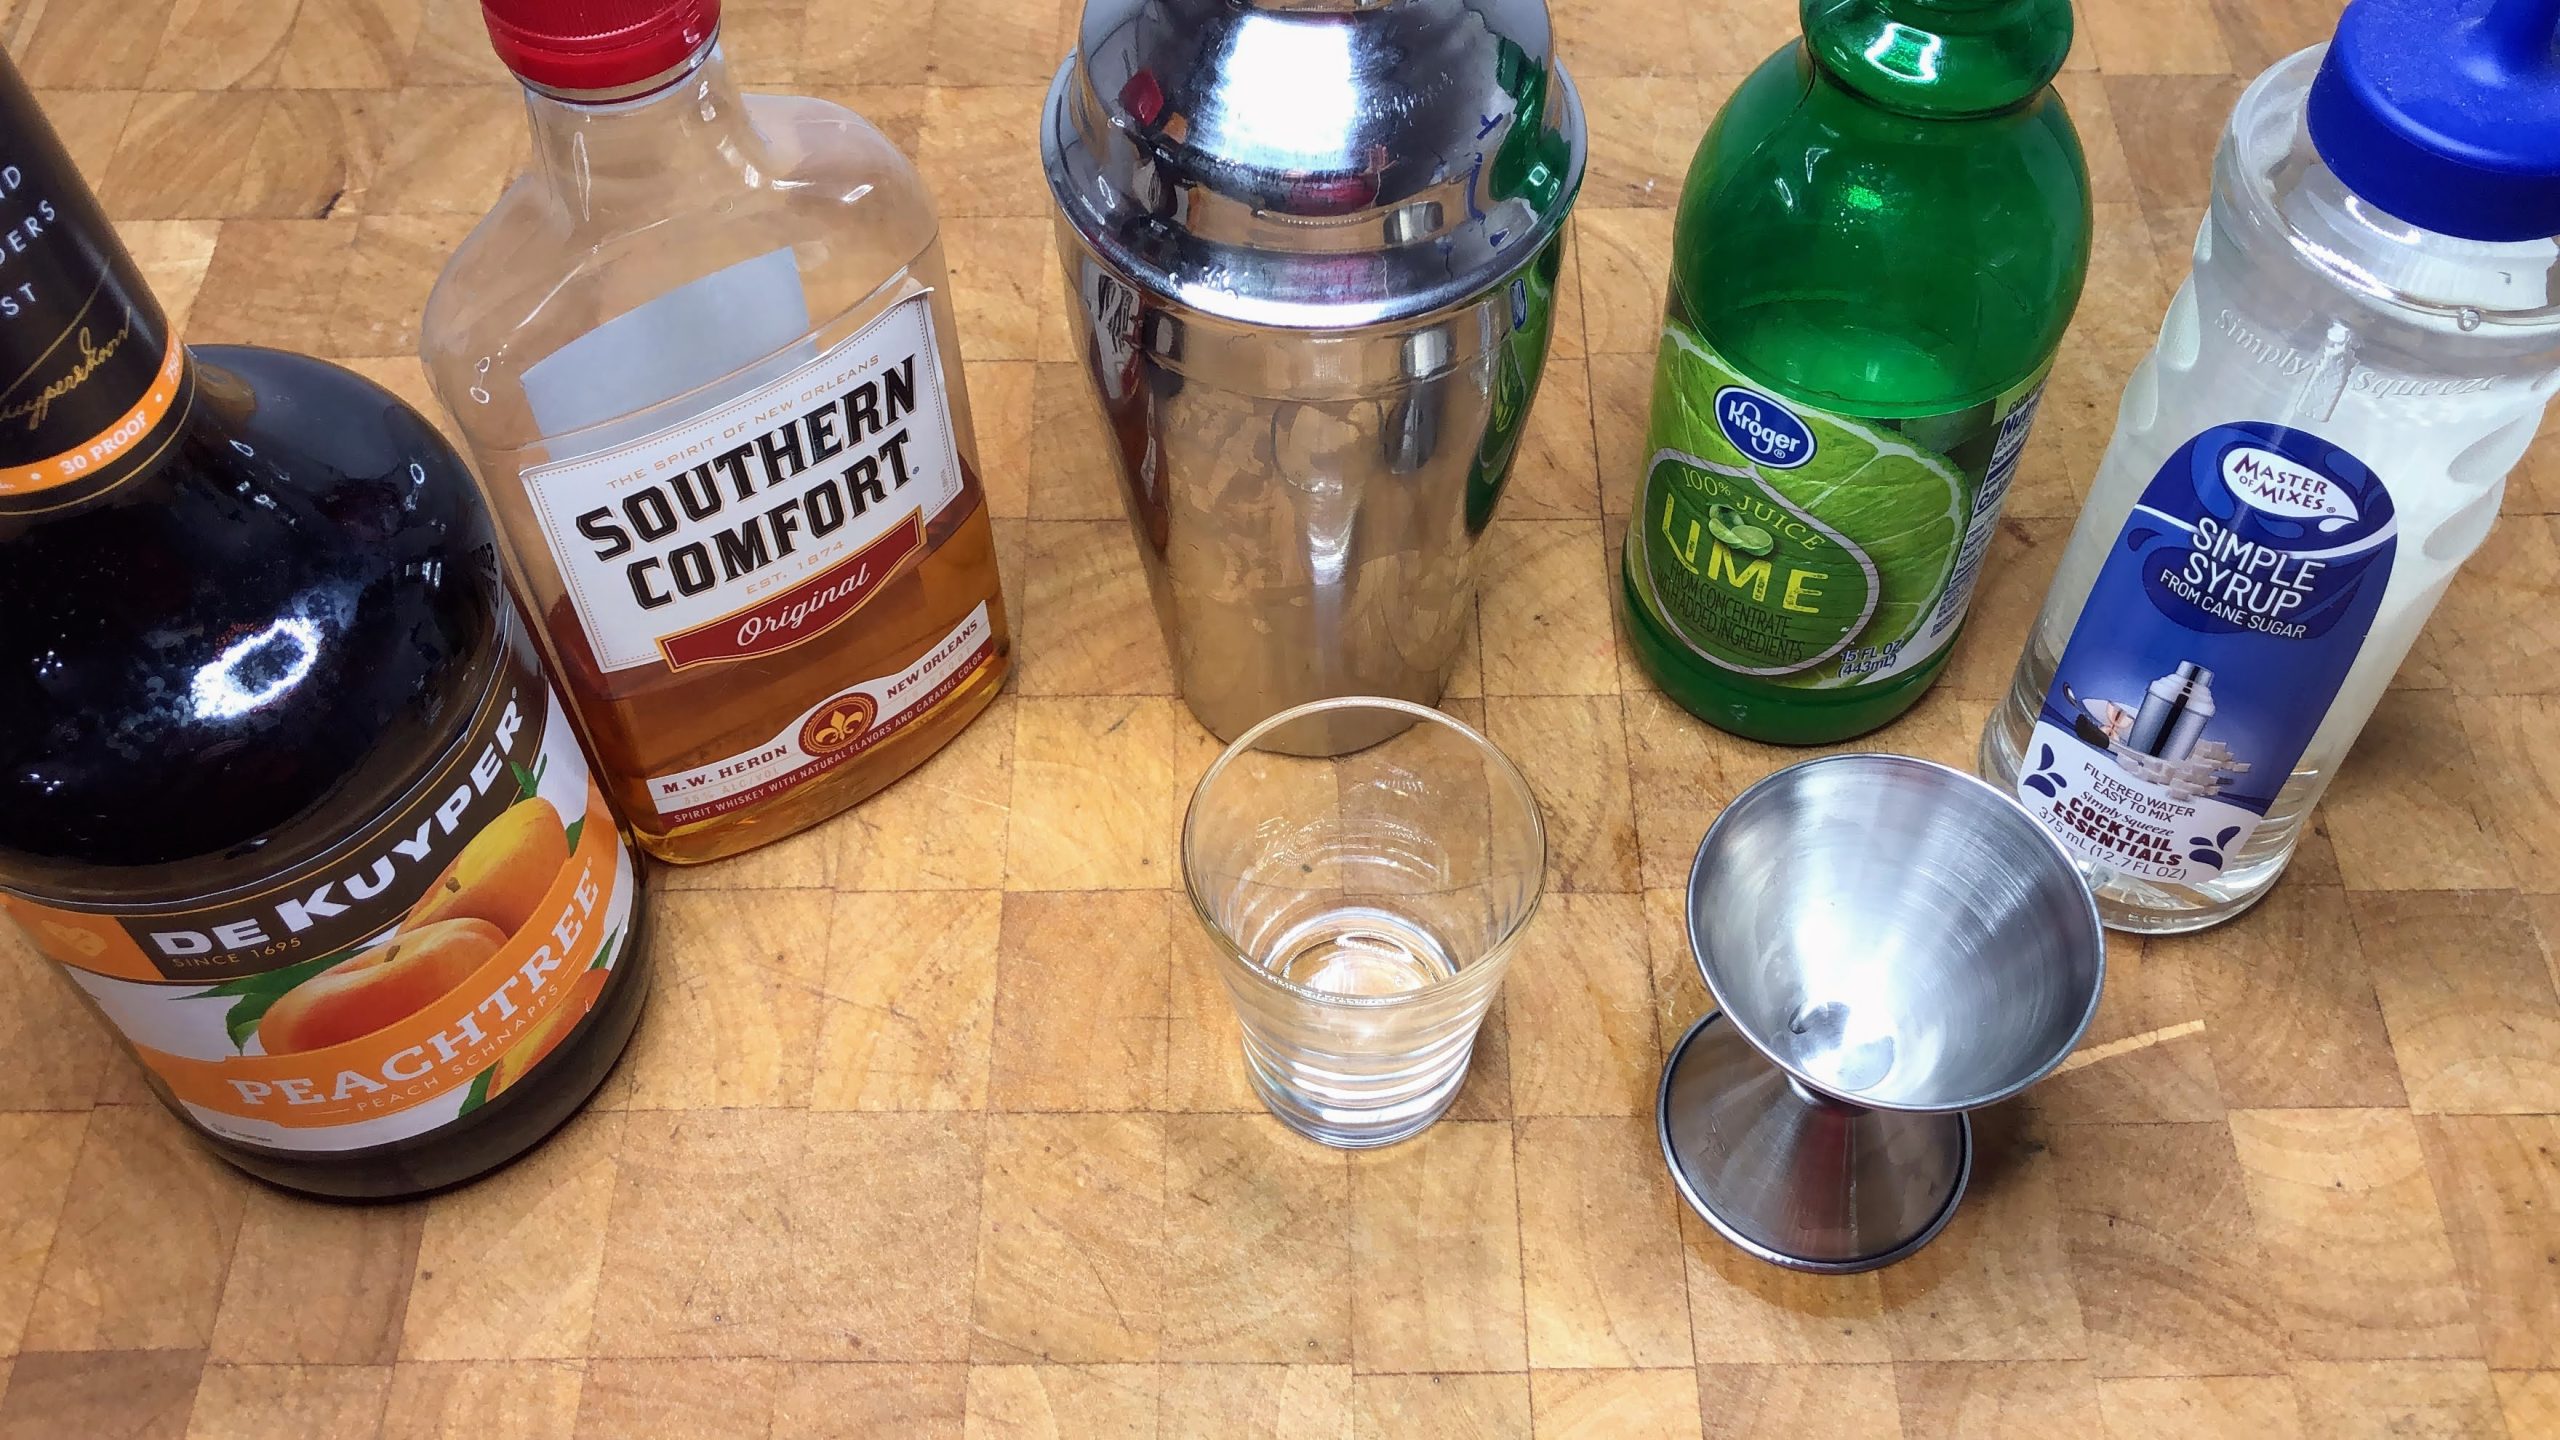 Peach schnapps, southern comfort, lime juice and simple syrup next to shot glass, cocktail shaker and jigger.